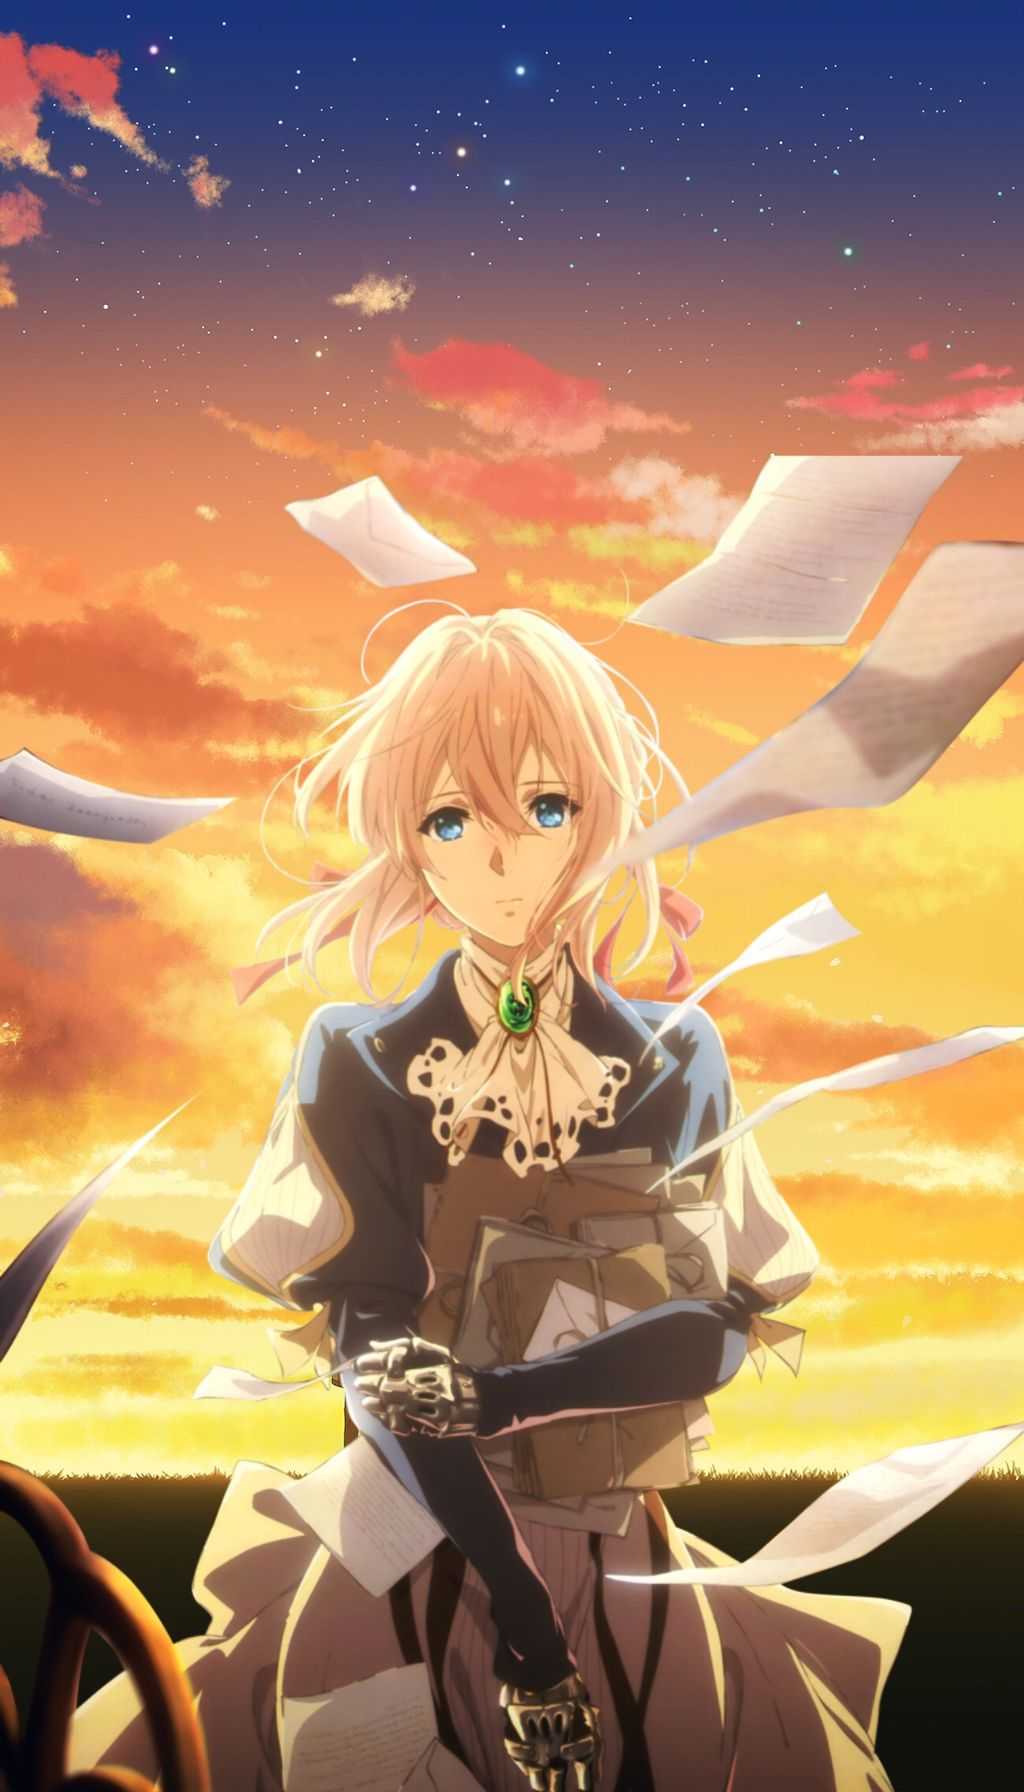 Violet Evergarden Wallpaper Phone - Kolpaper - Awesome Free Hd Wallpapers